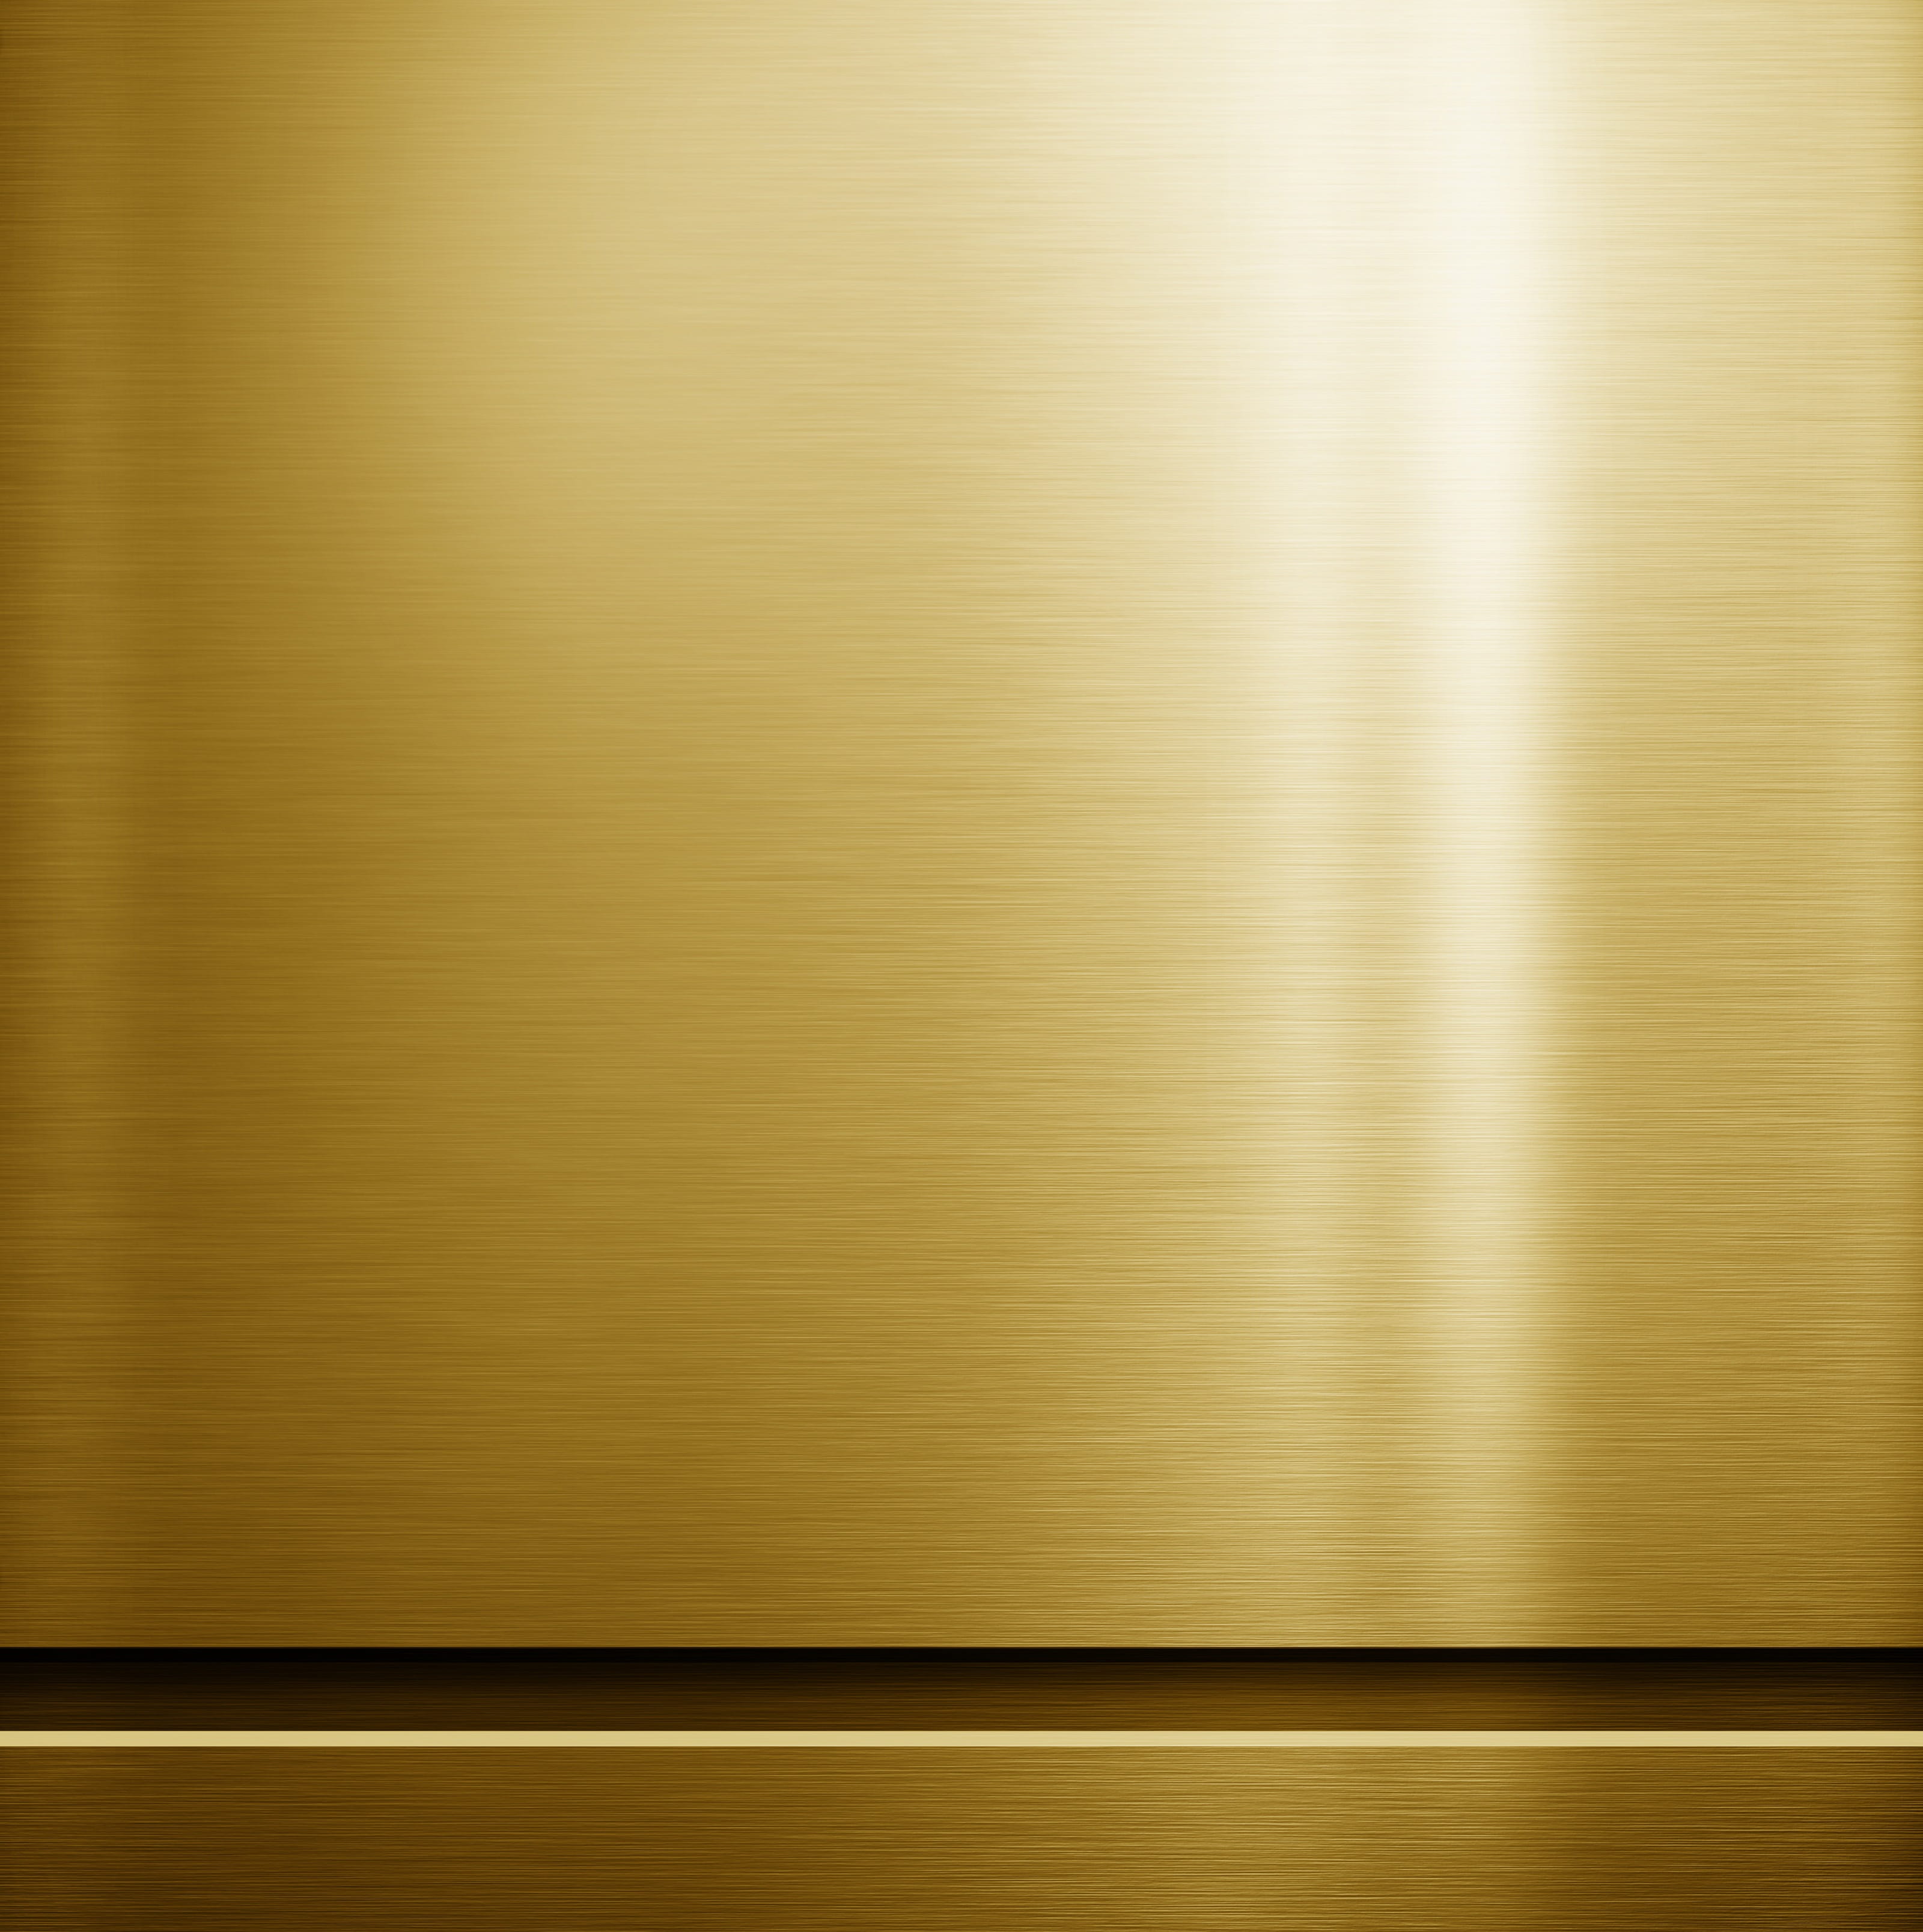 texture, metal, panel, gold, yellow, backgrounds, brushed metal